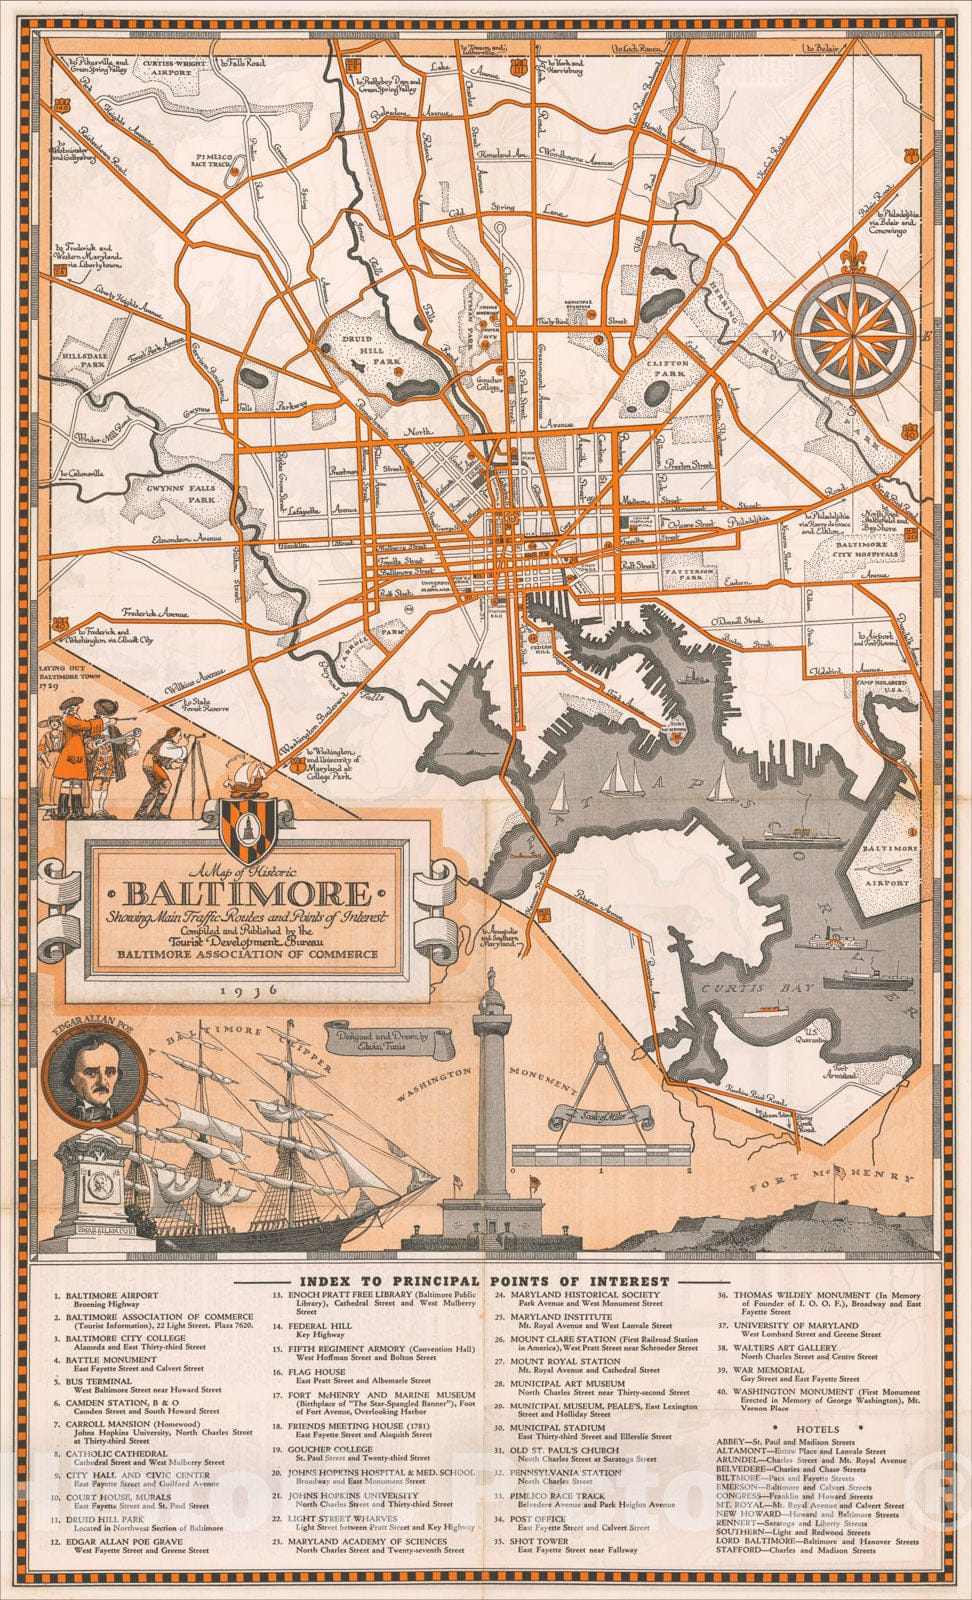 Historic Map : A Map of Historic Baltimore Showing Main Traffic Routes and Points of Interest, 1936, Edwin Tunis, Vintage Wall Art